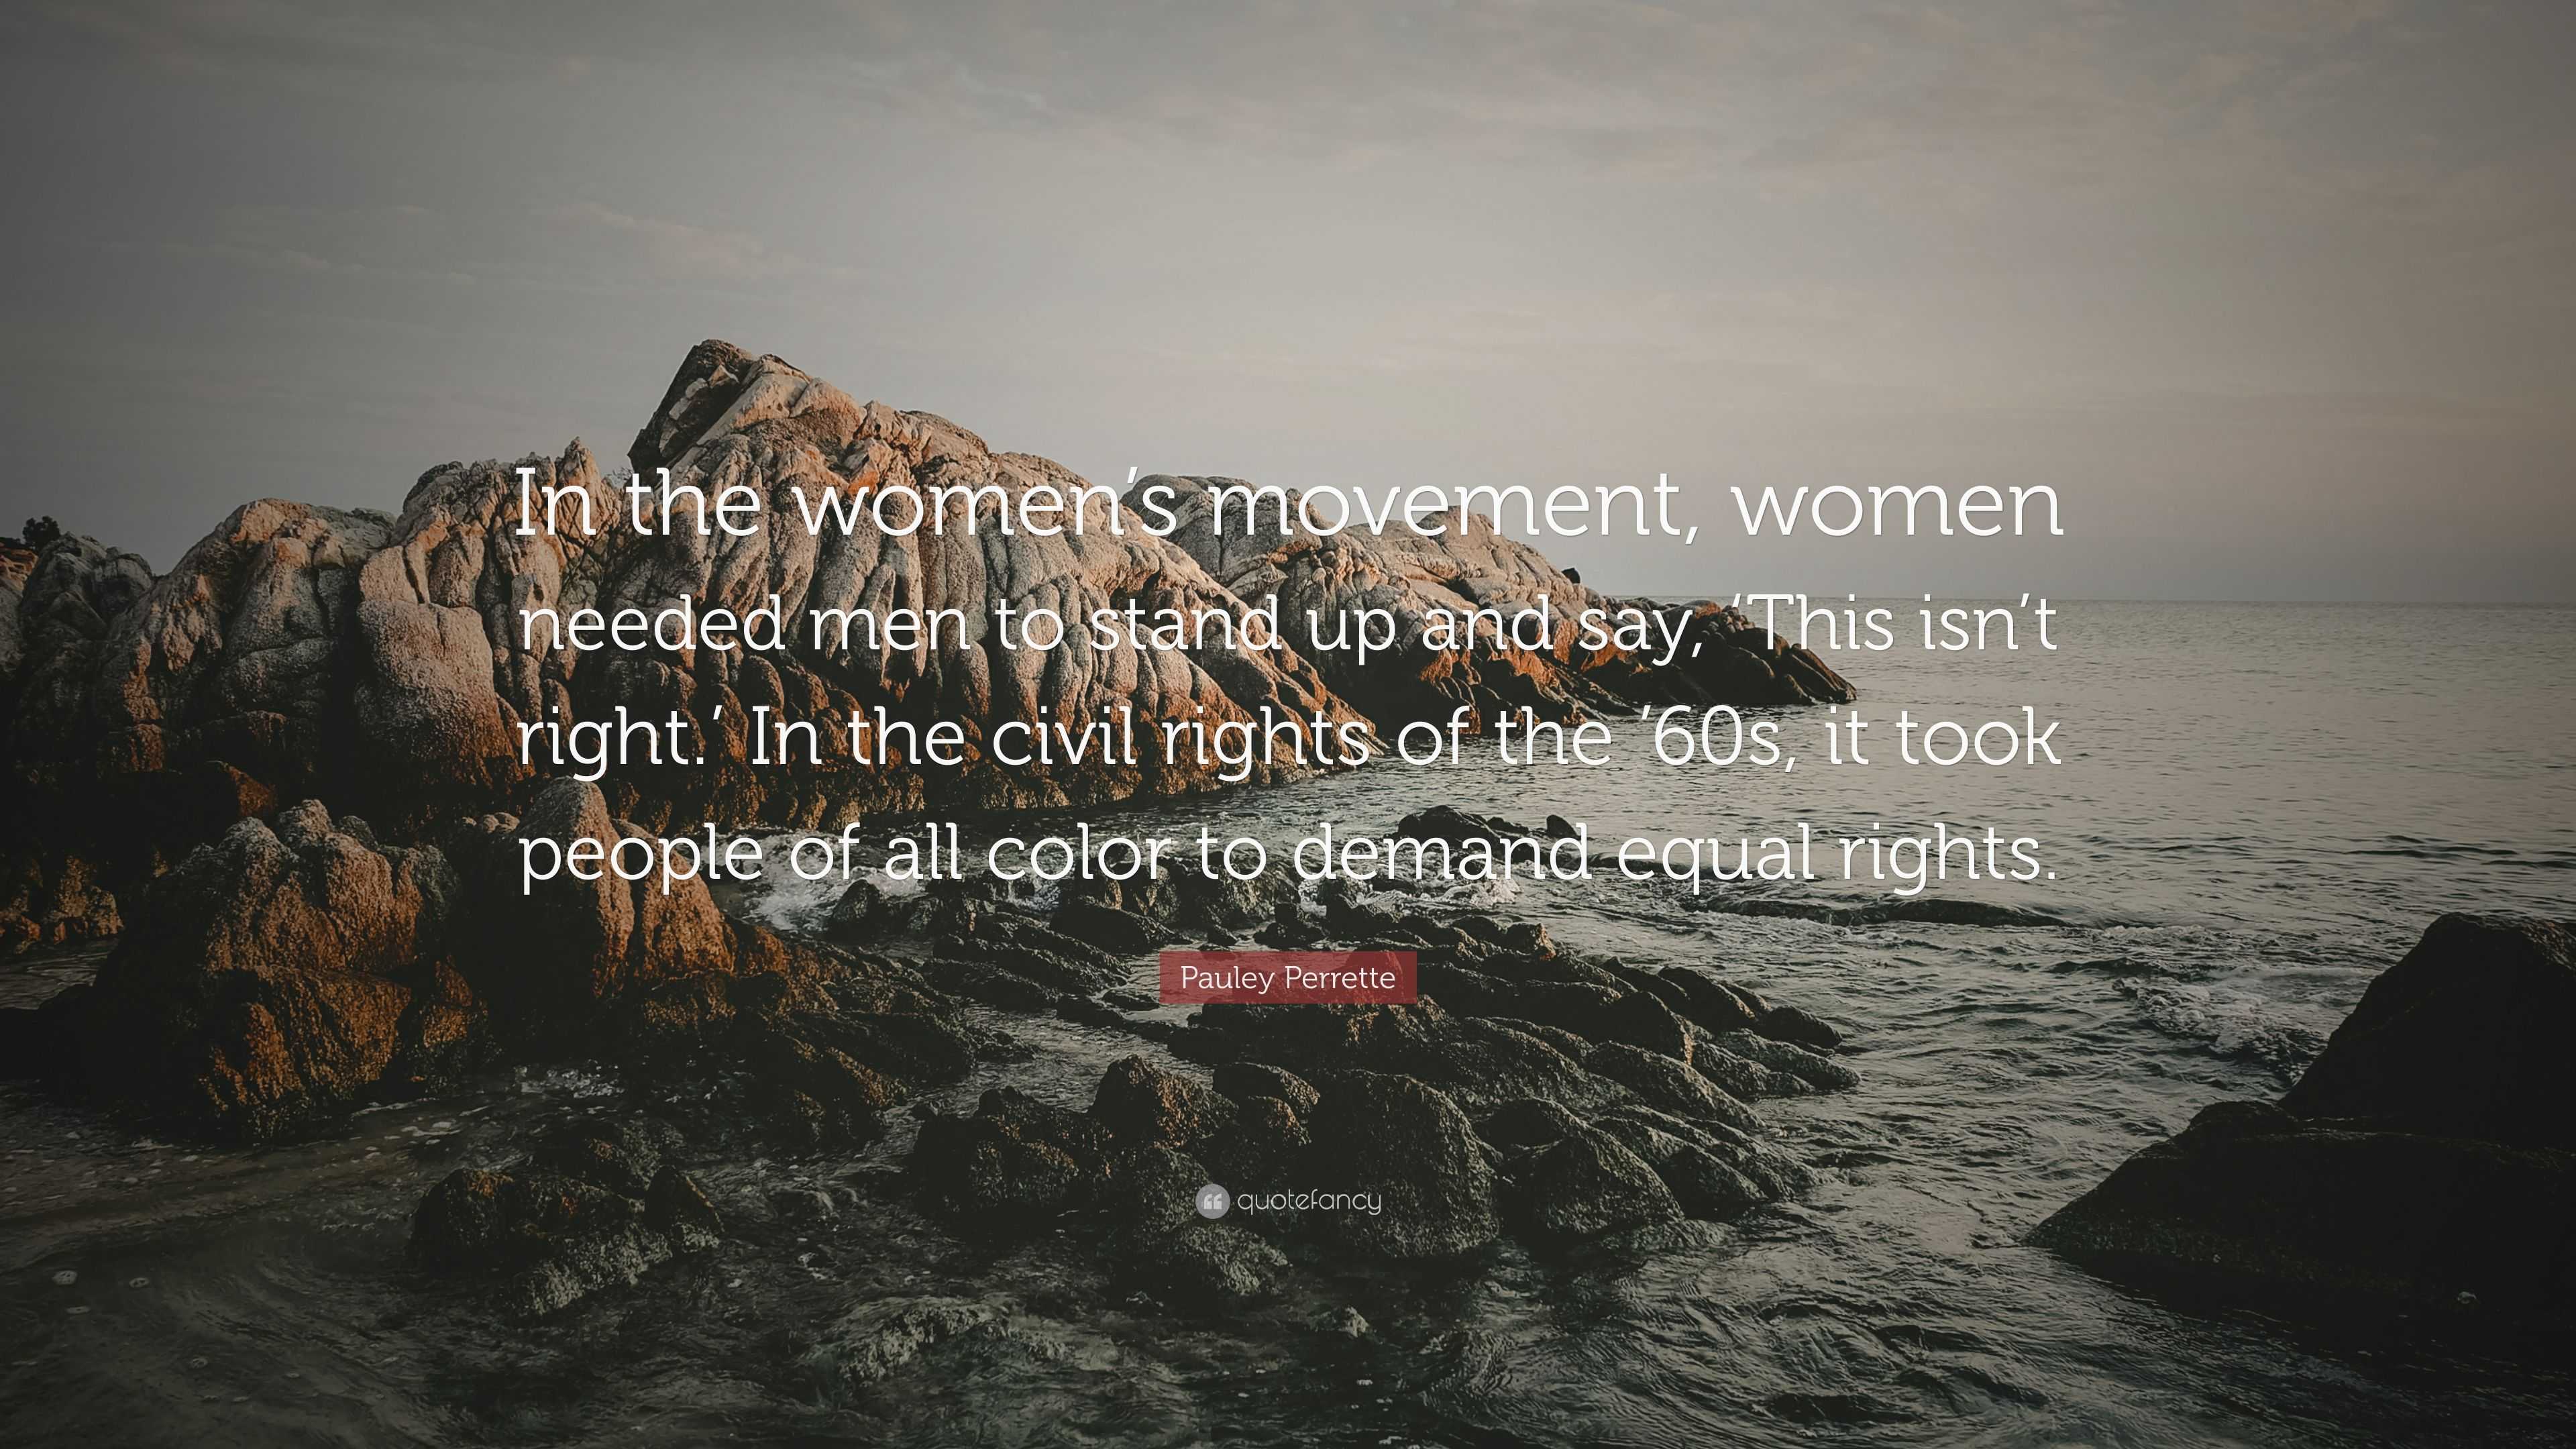 What do we mean when we say 'women's movement'?